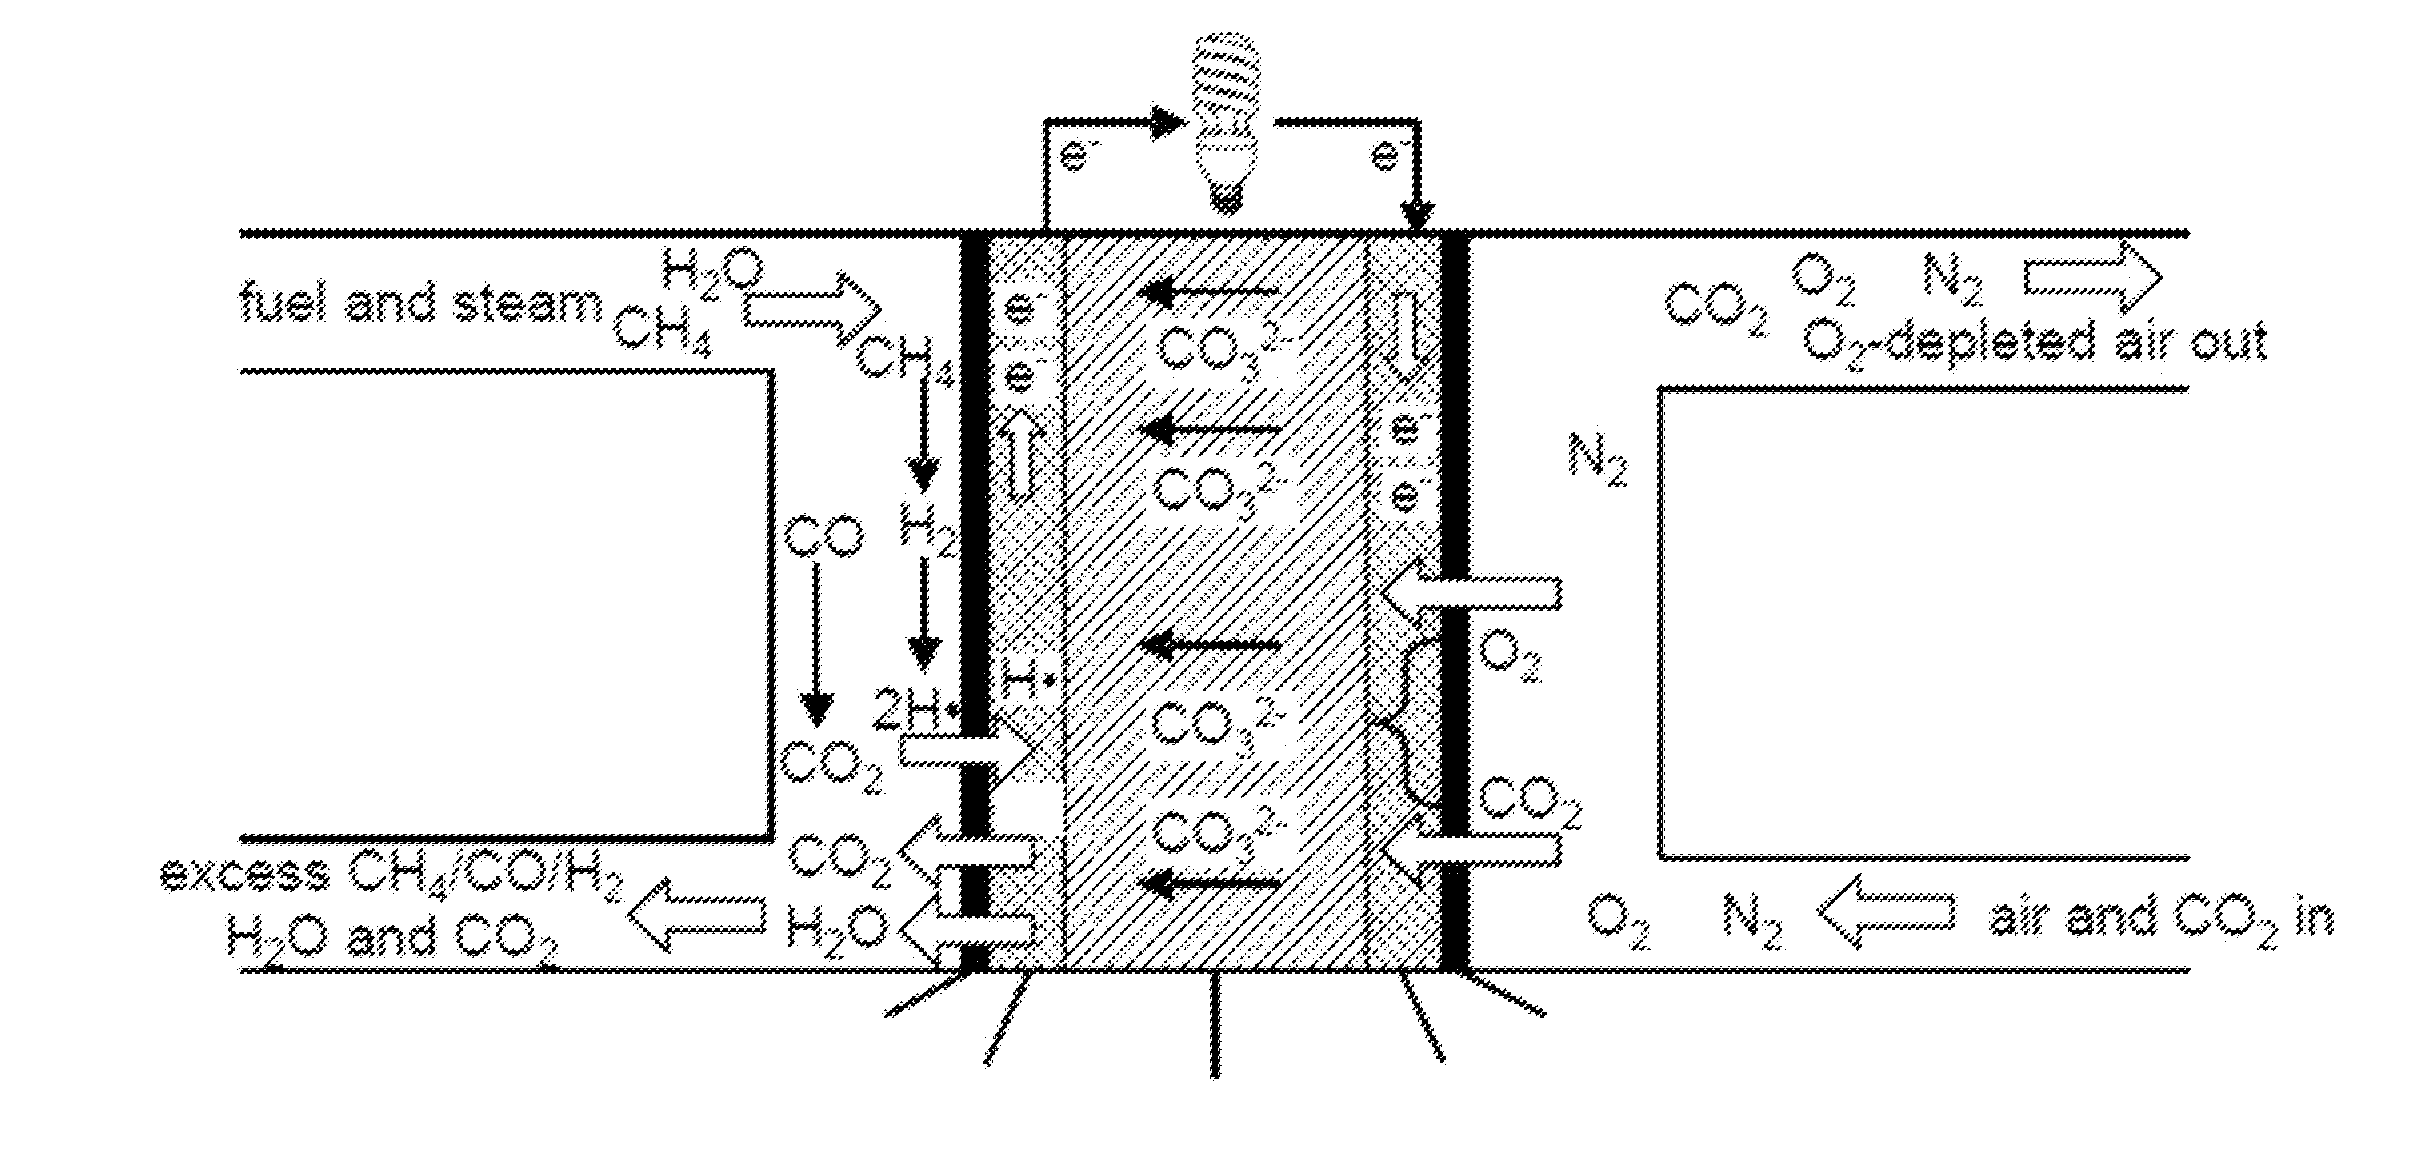 Integrated power generation and carbon capture using fuel cells